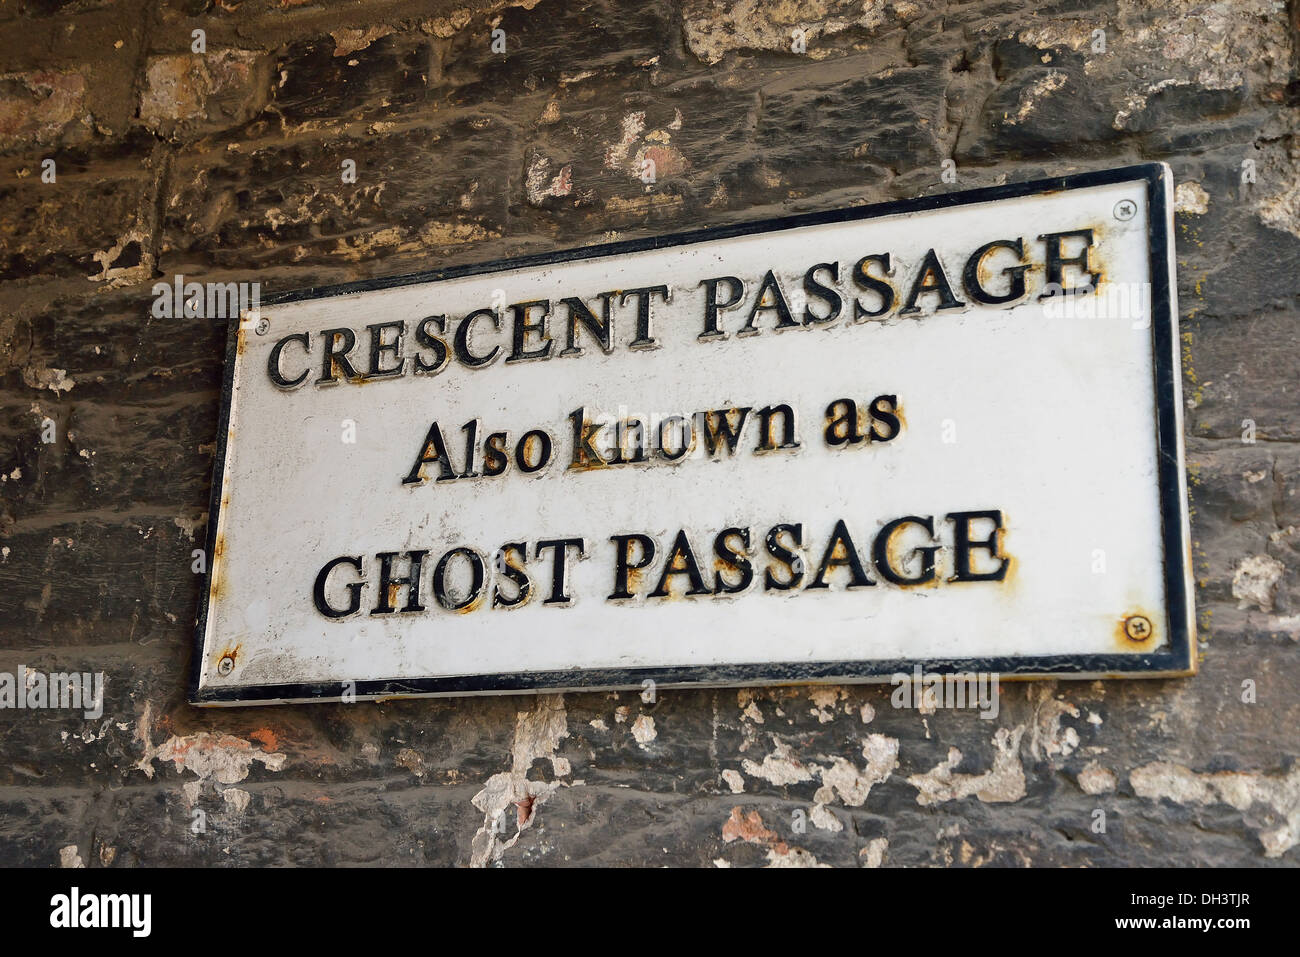 Crescent Passage (Ghost Passage) sign in Old Quarter, Wisbech, Cambridgeshire, England, United Kingdom Stock Photo